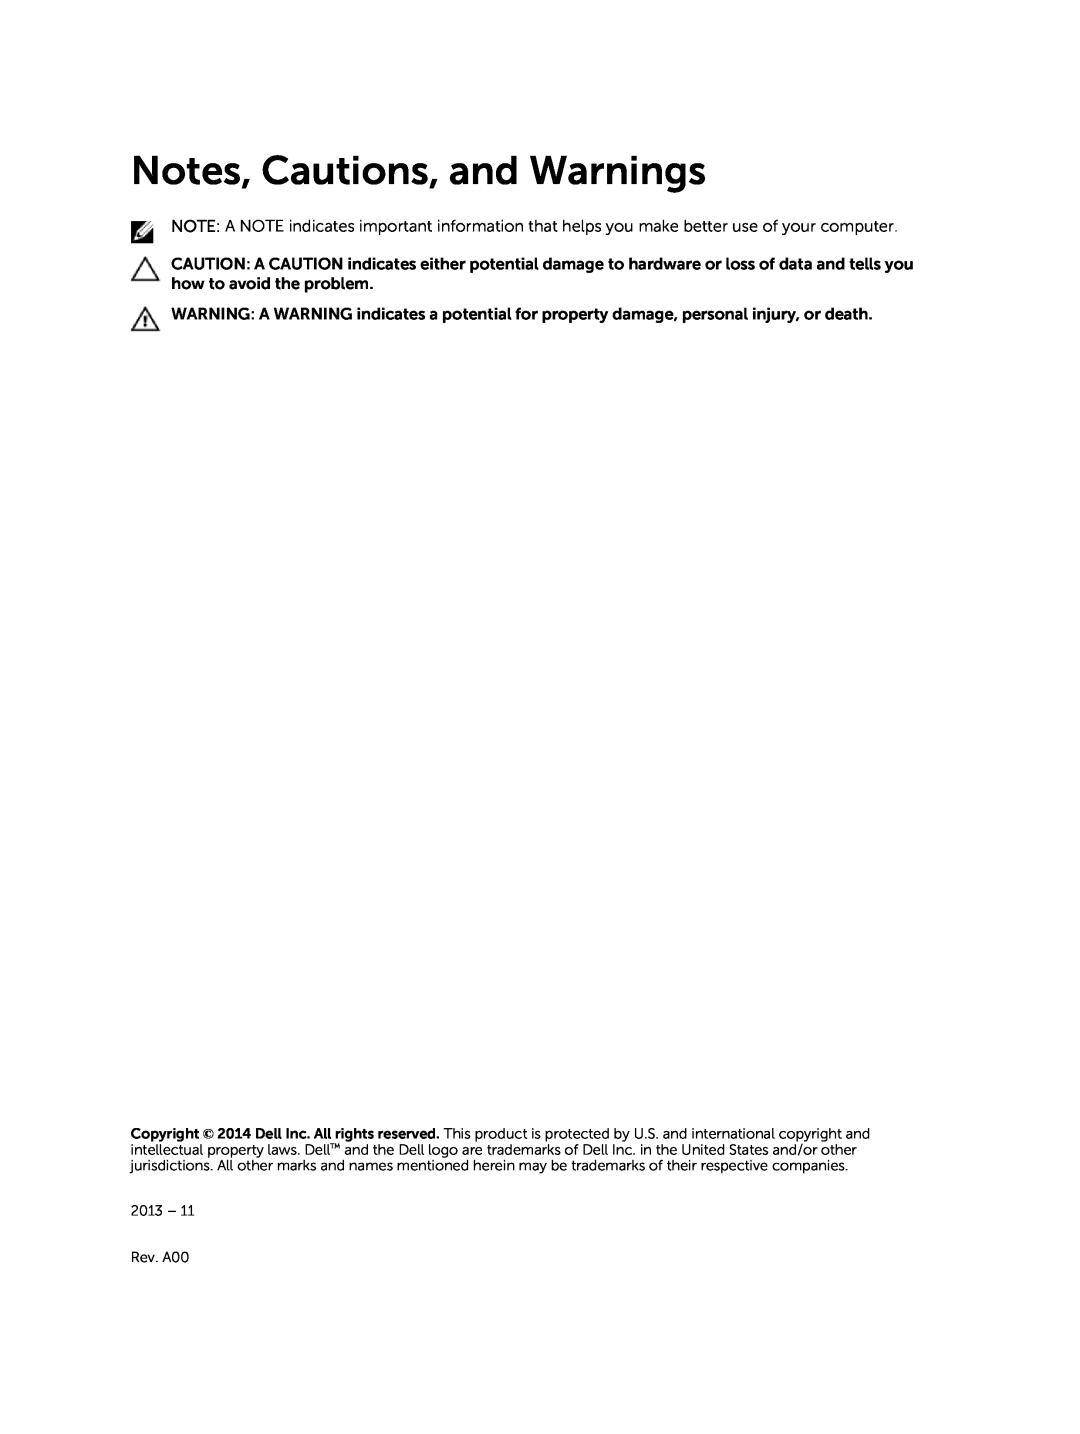 Dell R420xr manual Notes, Cautions, and Warnings 